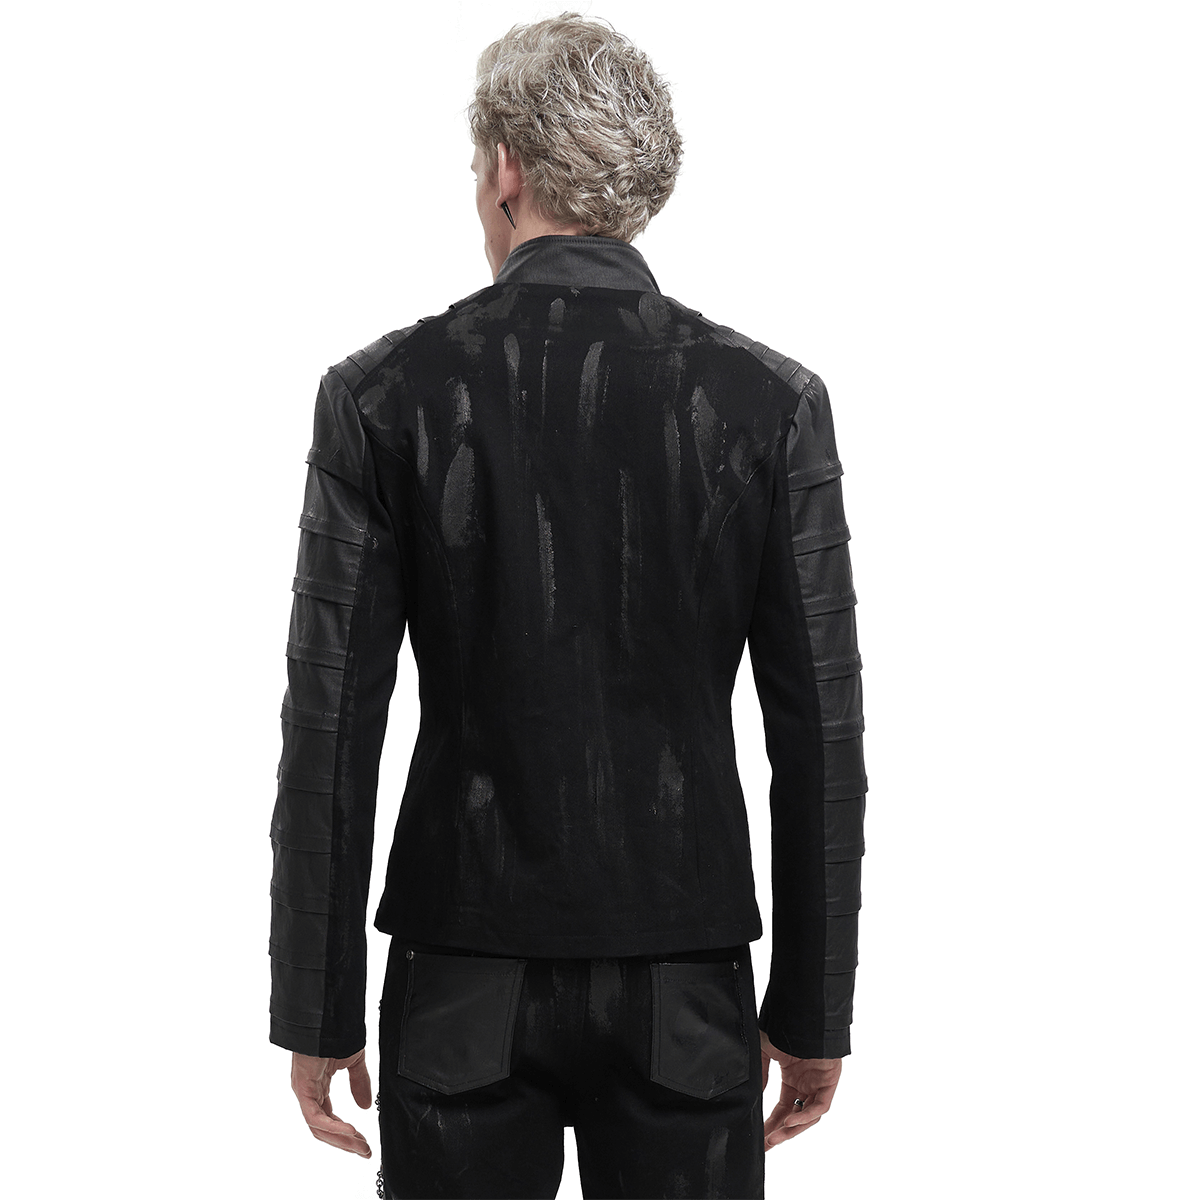 Men's Gothic Stand Collar Jacket with Metal Eyelets / Punk Short Jacket with Ragged effect on Back